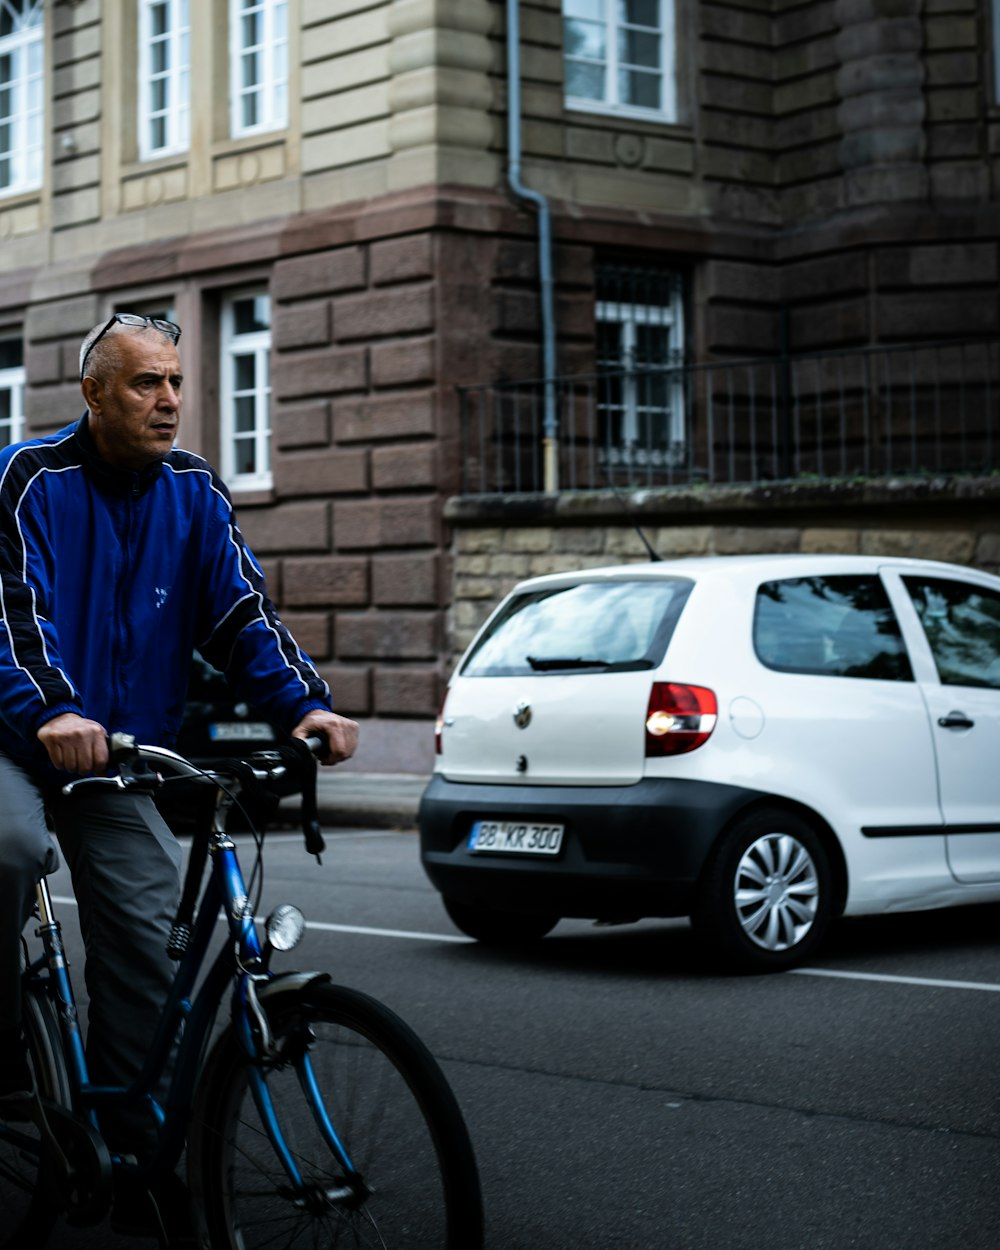 man in blue jacket riding on bicycle